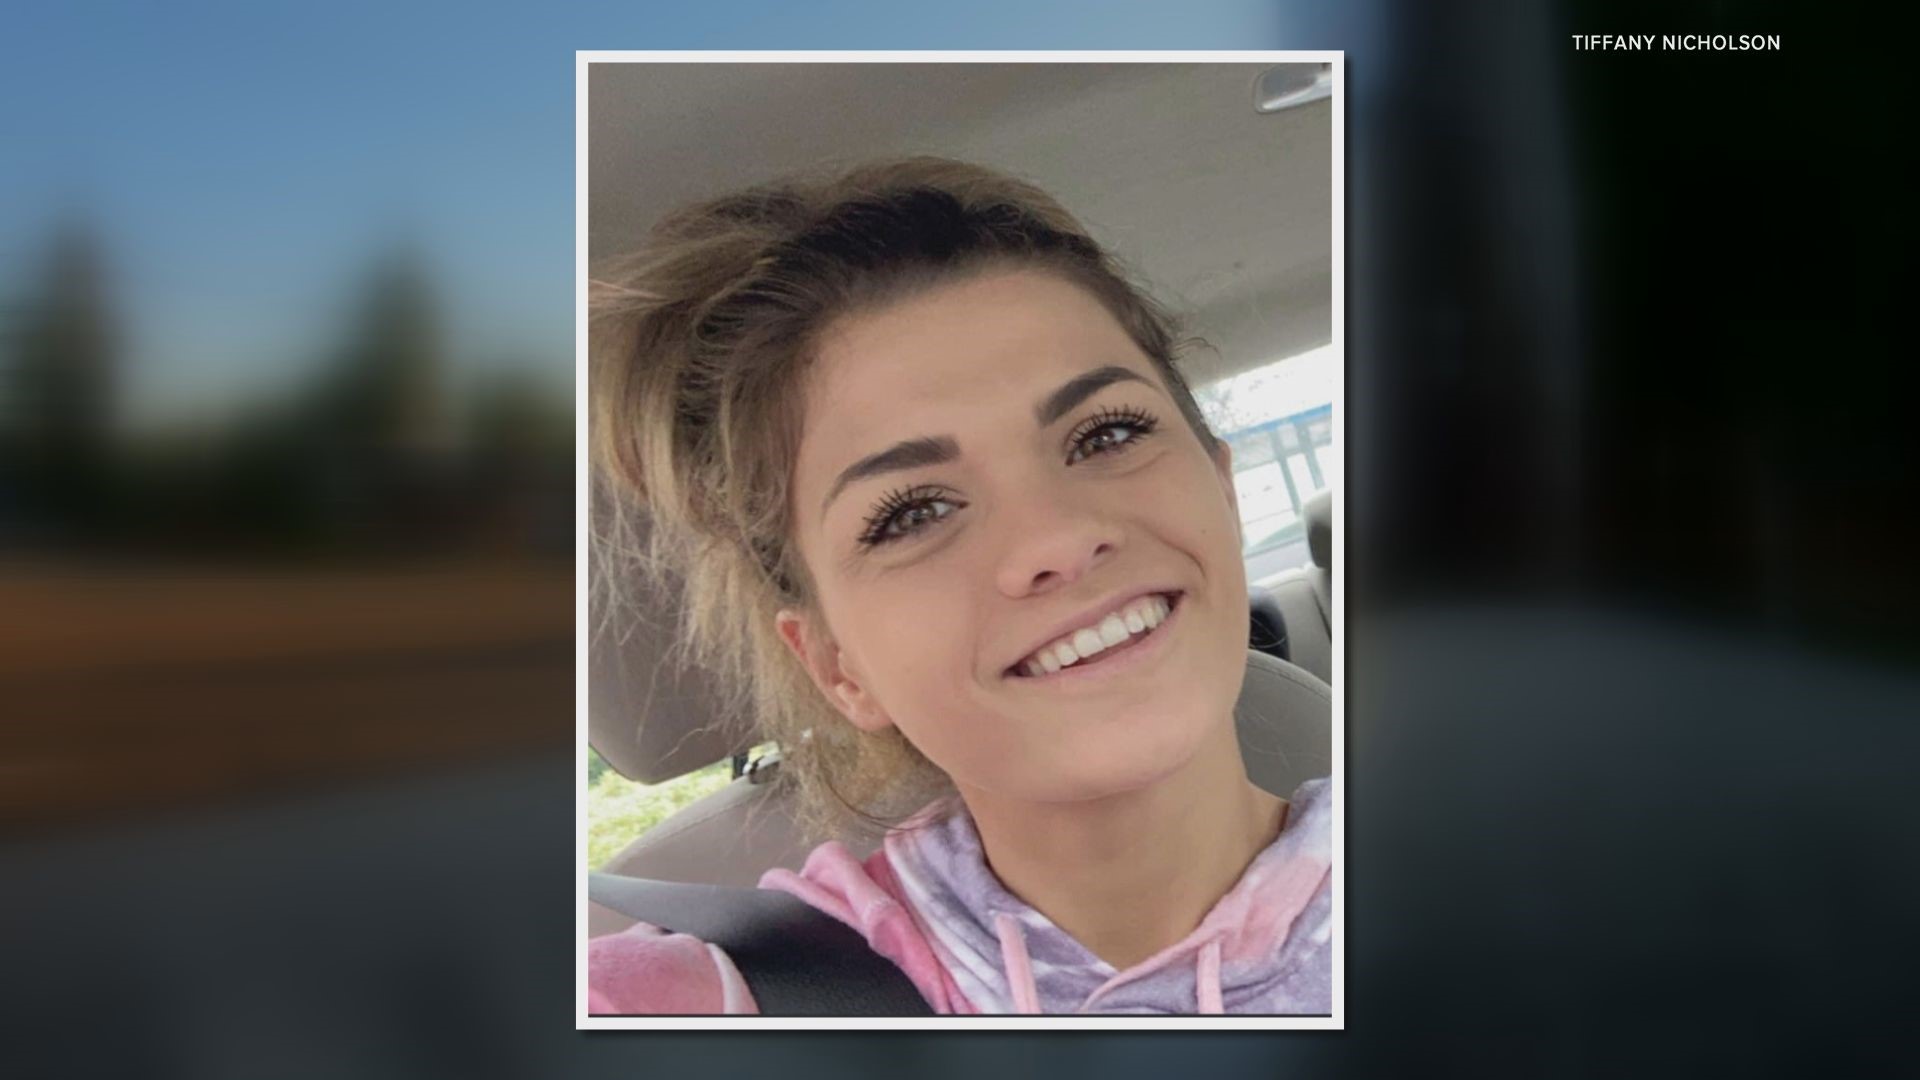 Jonathan Peña was the driver of the car that struck and killed 26-year-old Ashlee McGill while she waited at a bus stop in Southeast Portland in 2022.